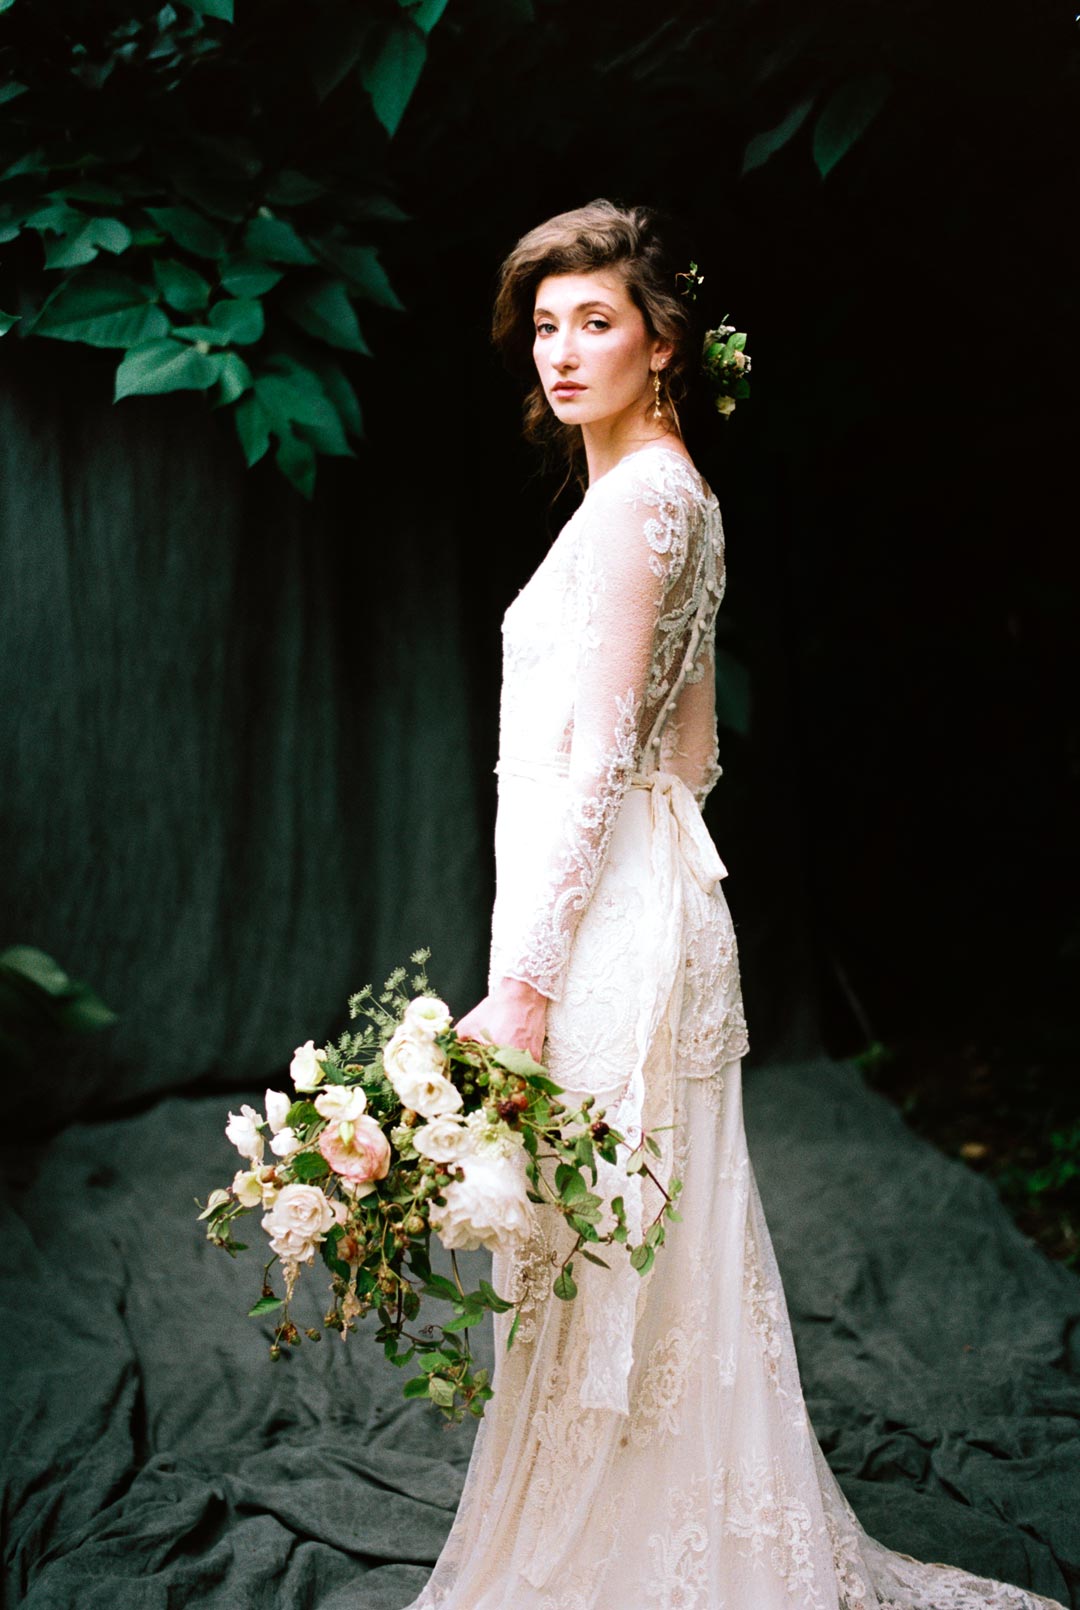 Pearle Wedding Dress Design by Claire Pettibone Colorful Vintage Styled Dress